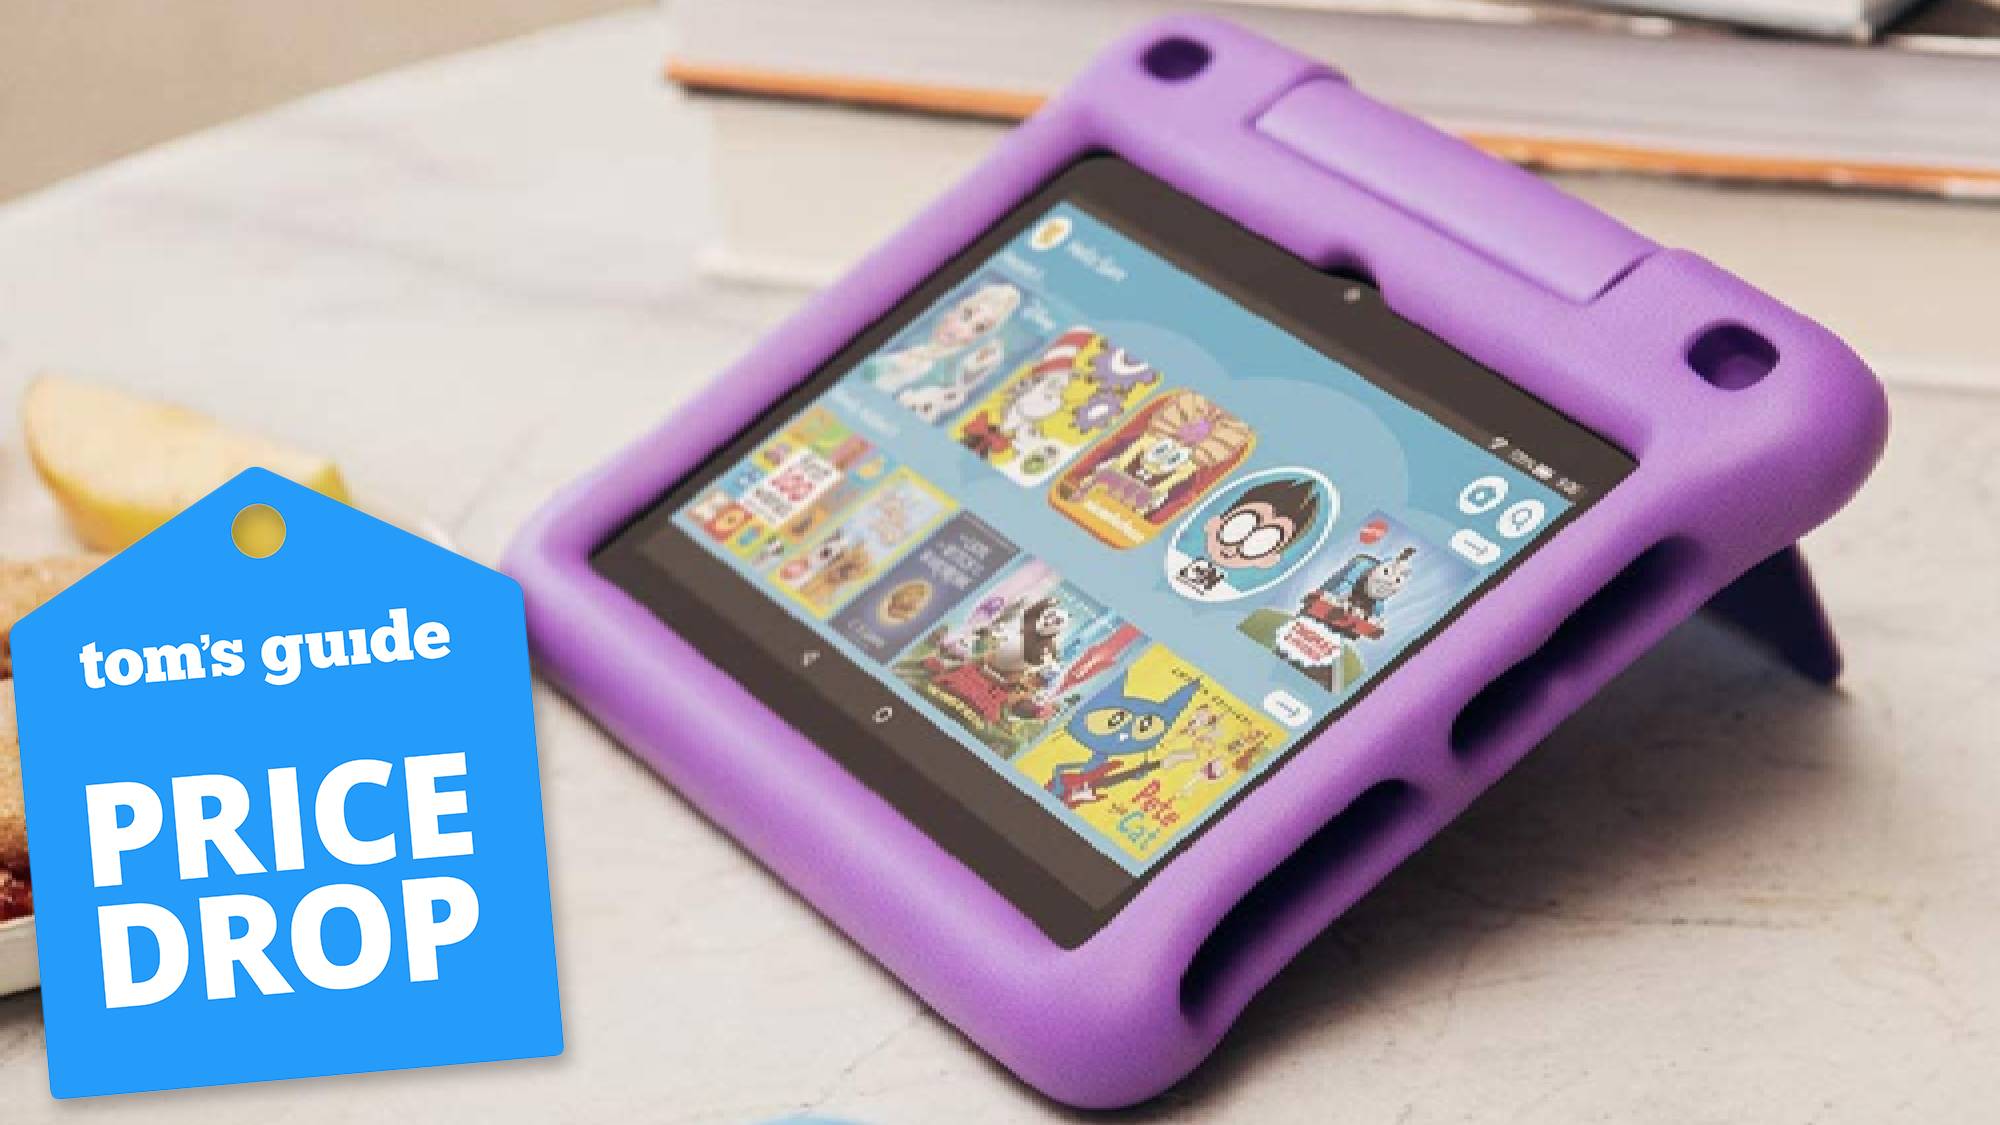 Fire HD 8 Kids tablet with a Tom's Guide deal tag